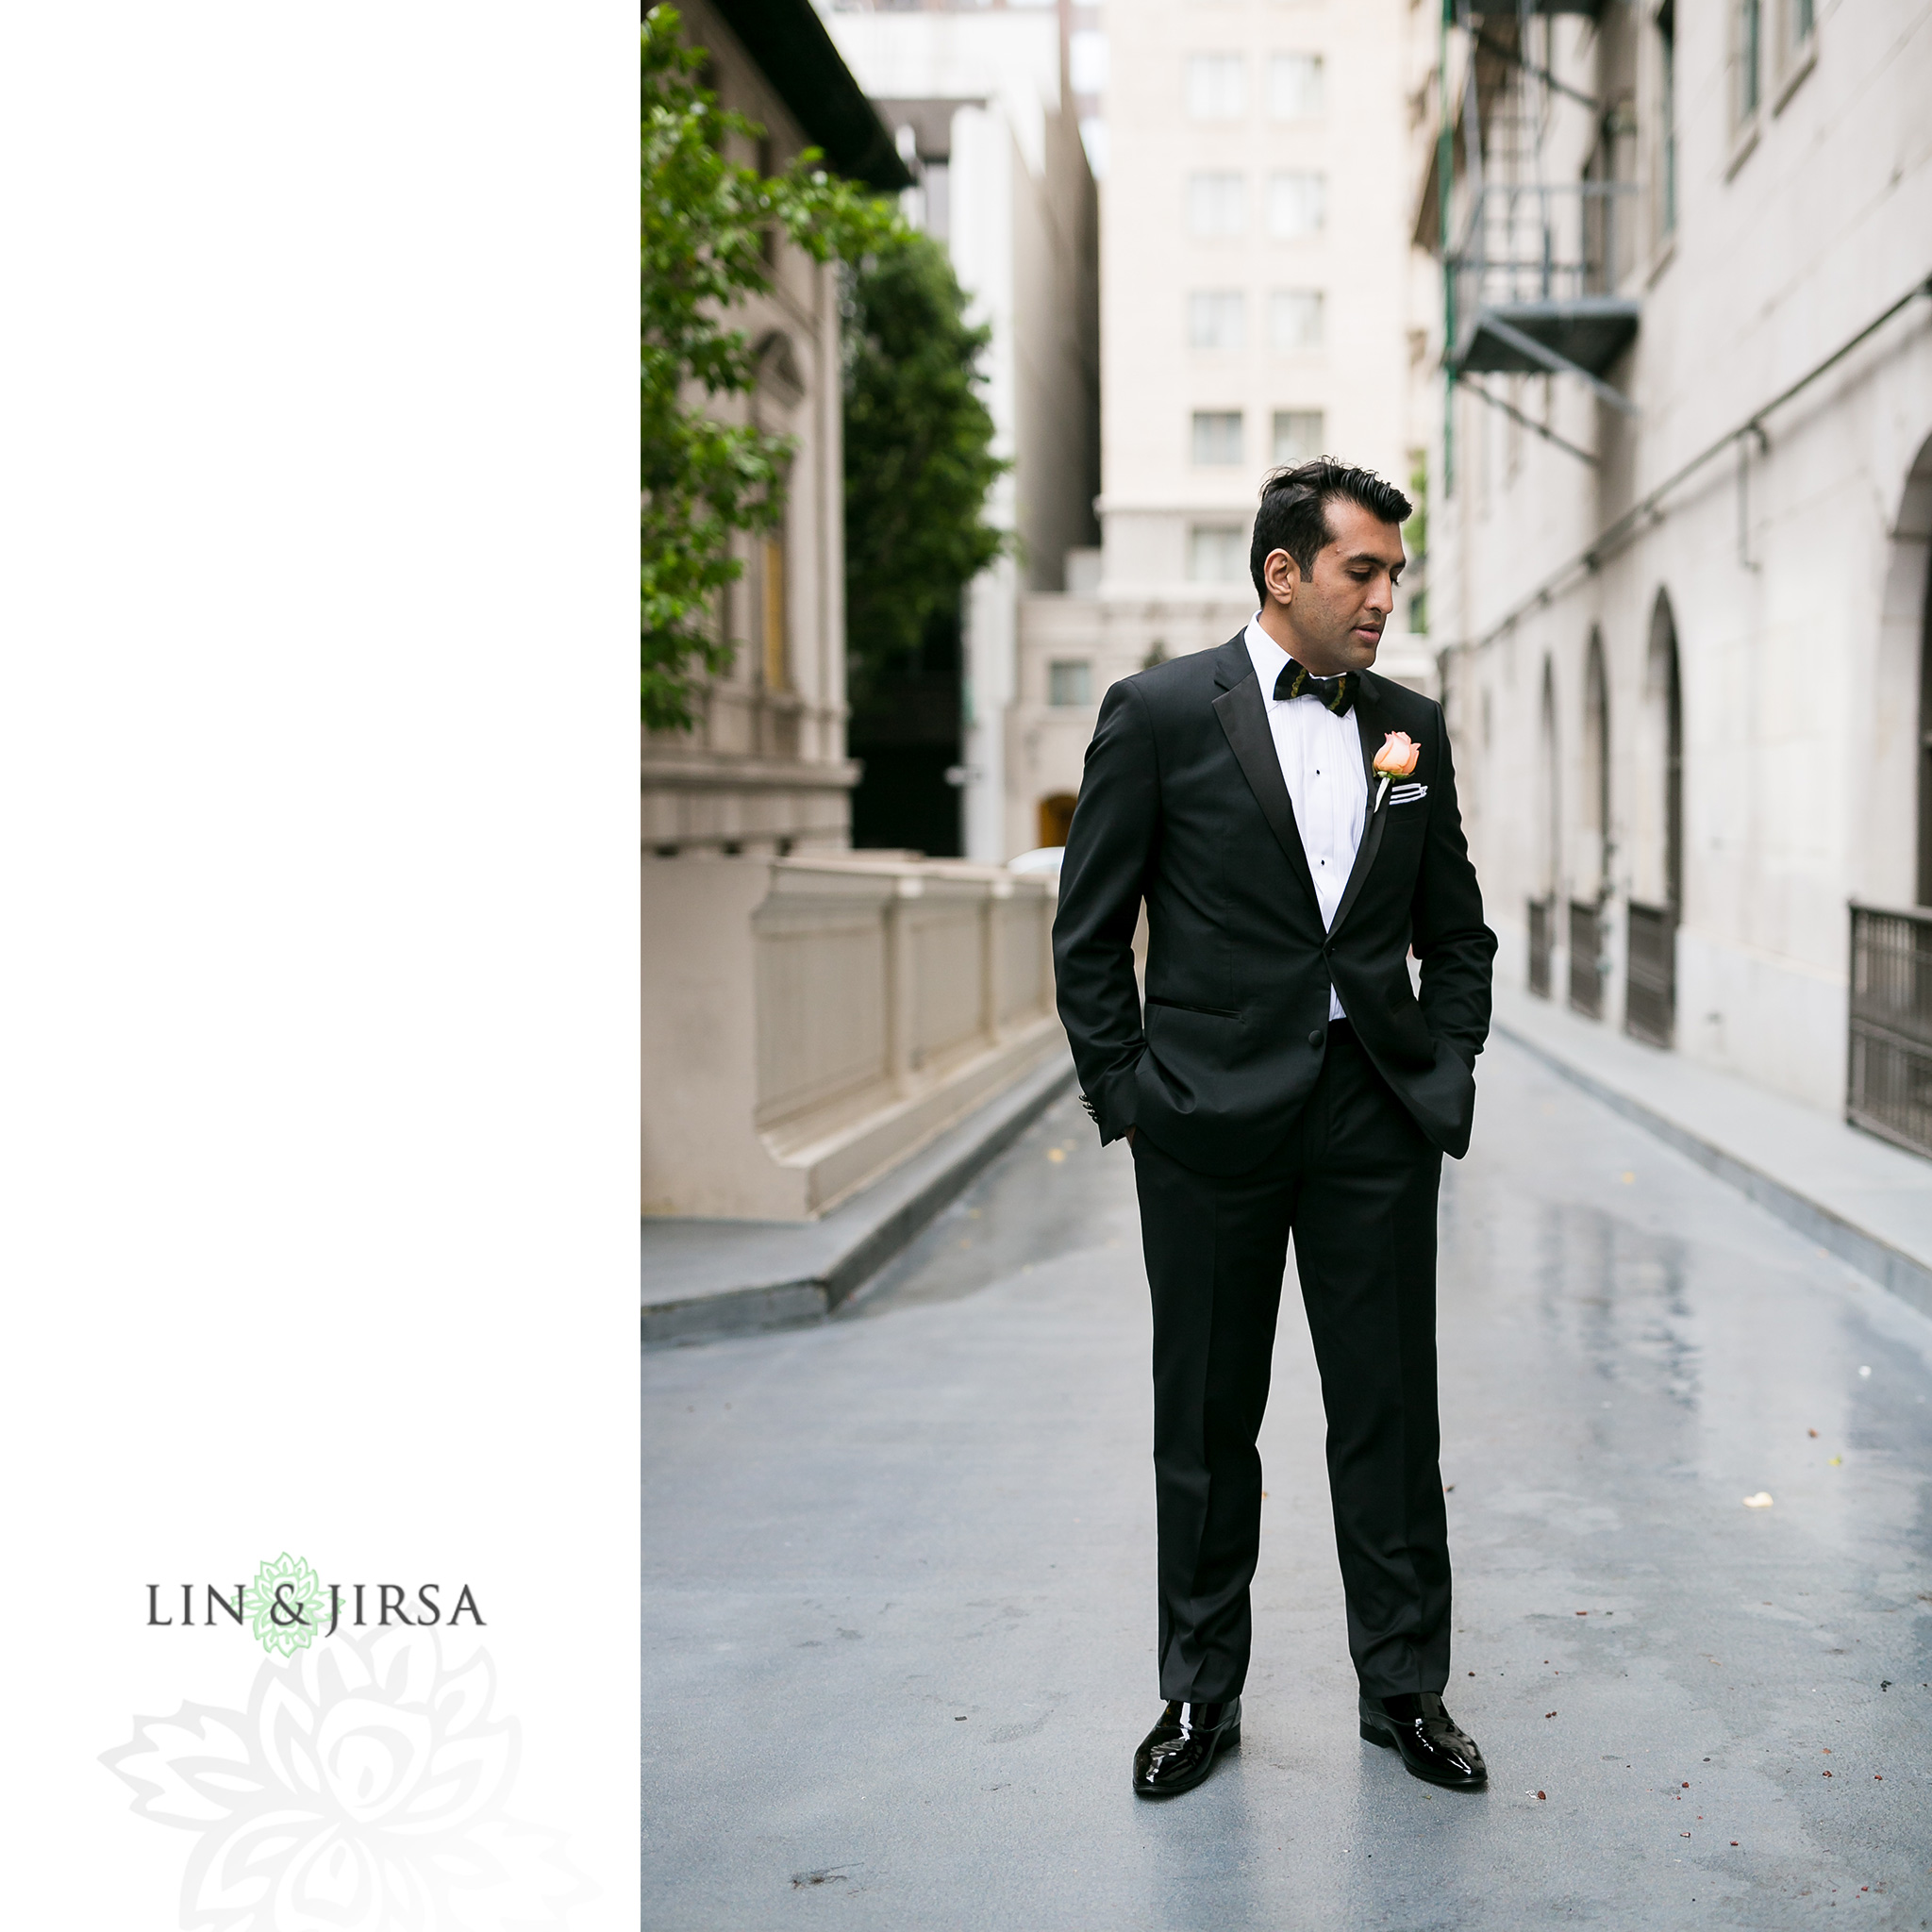 09-the-biltmore-los-angeles-wedding-photography